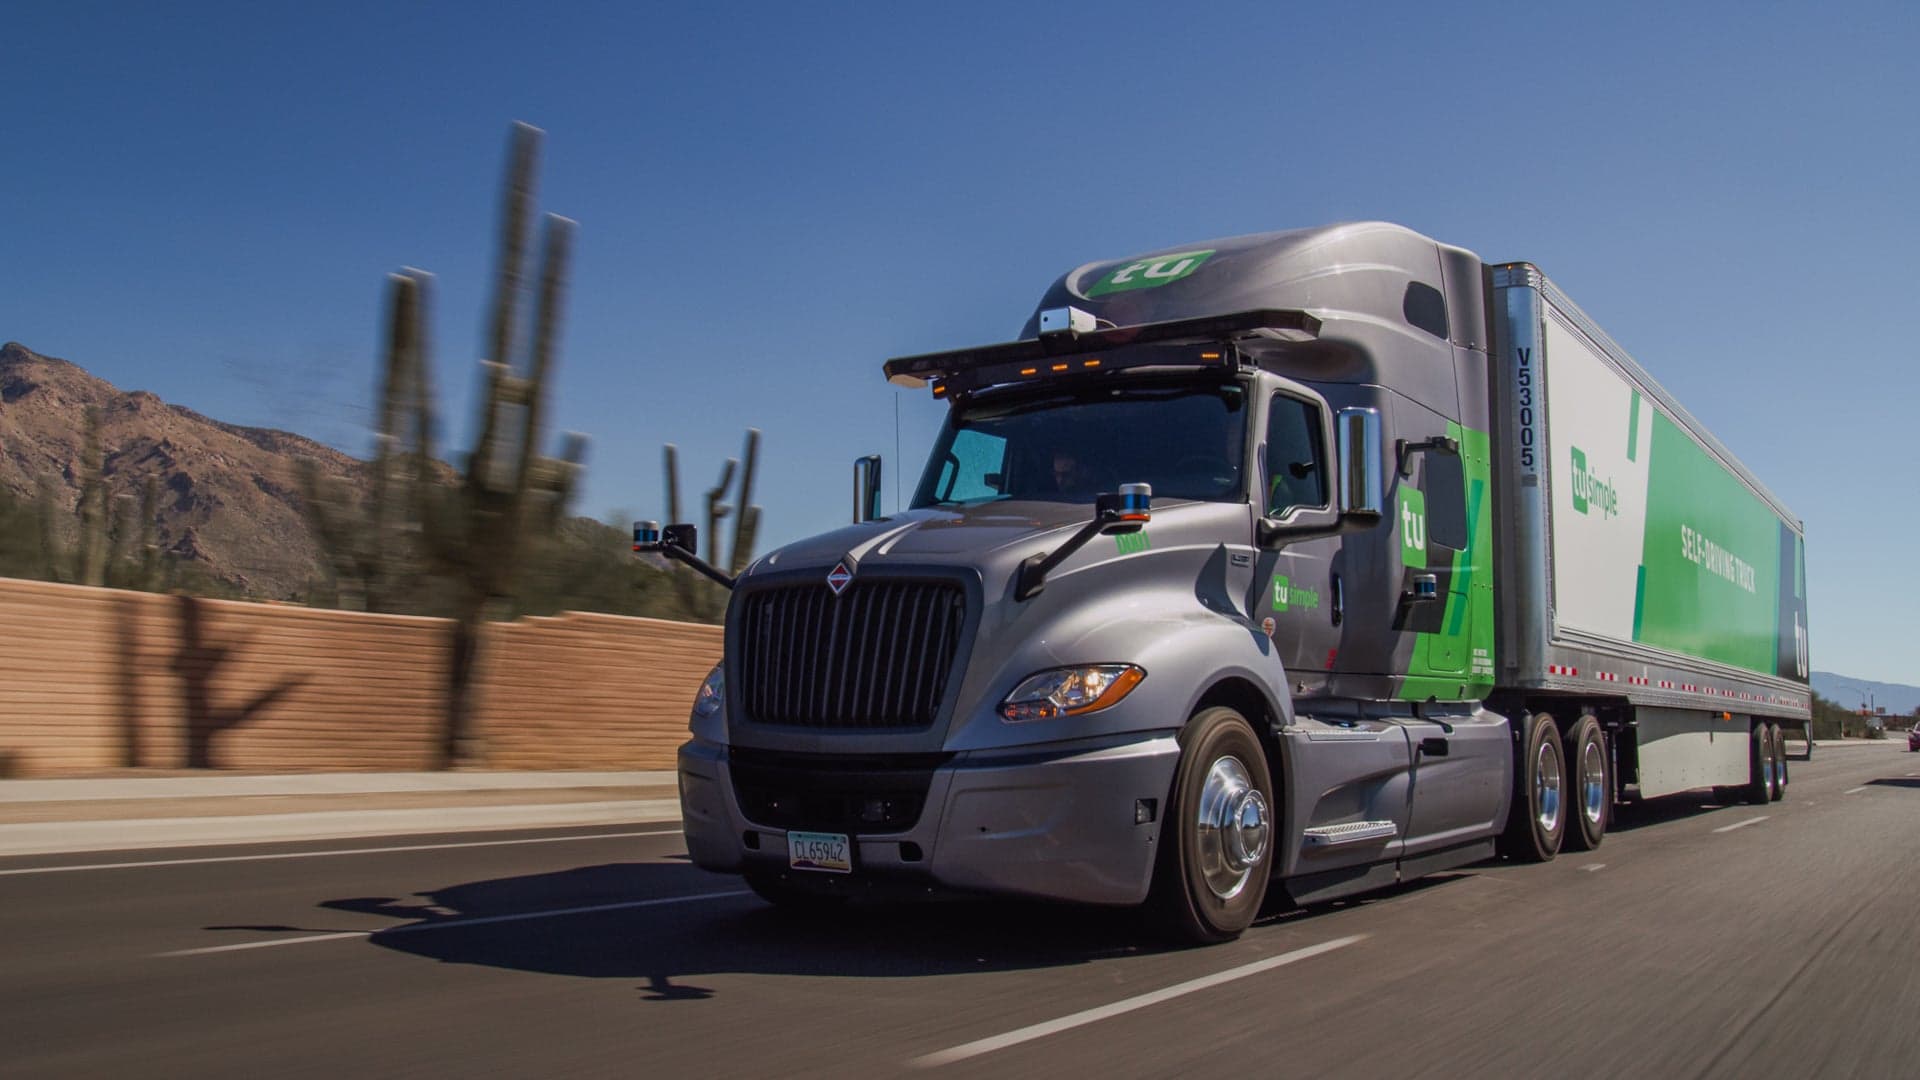 Self-Driving Semi-Truck Completes 950-Mile Delivery 10 Hours Faster Than a Human Trucker Could